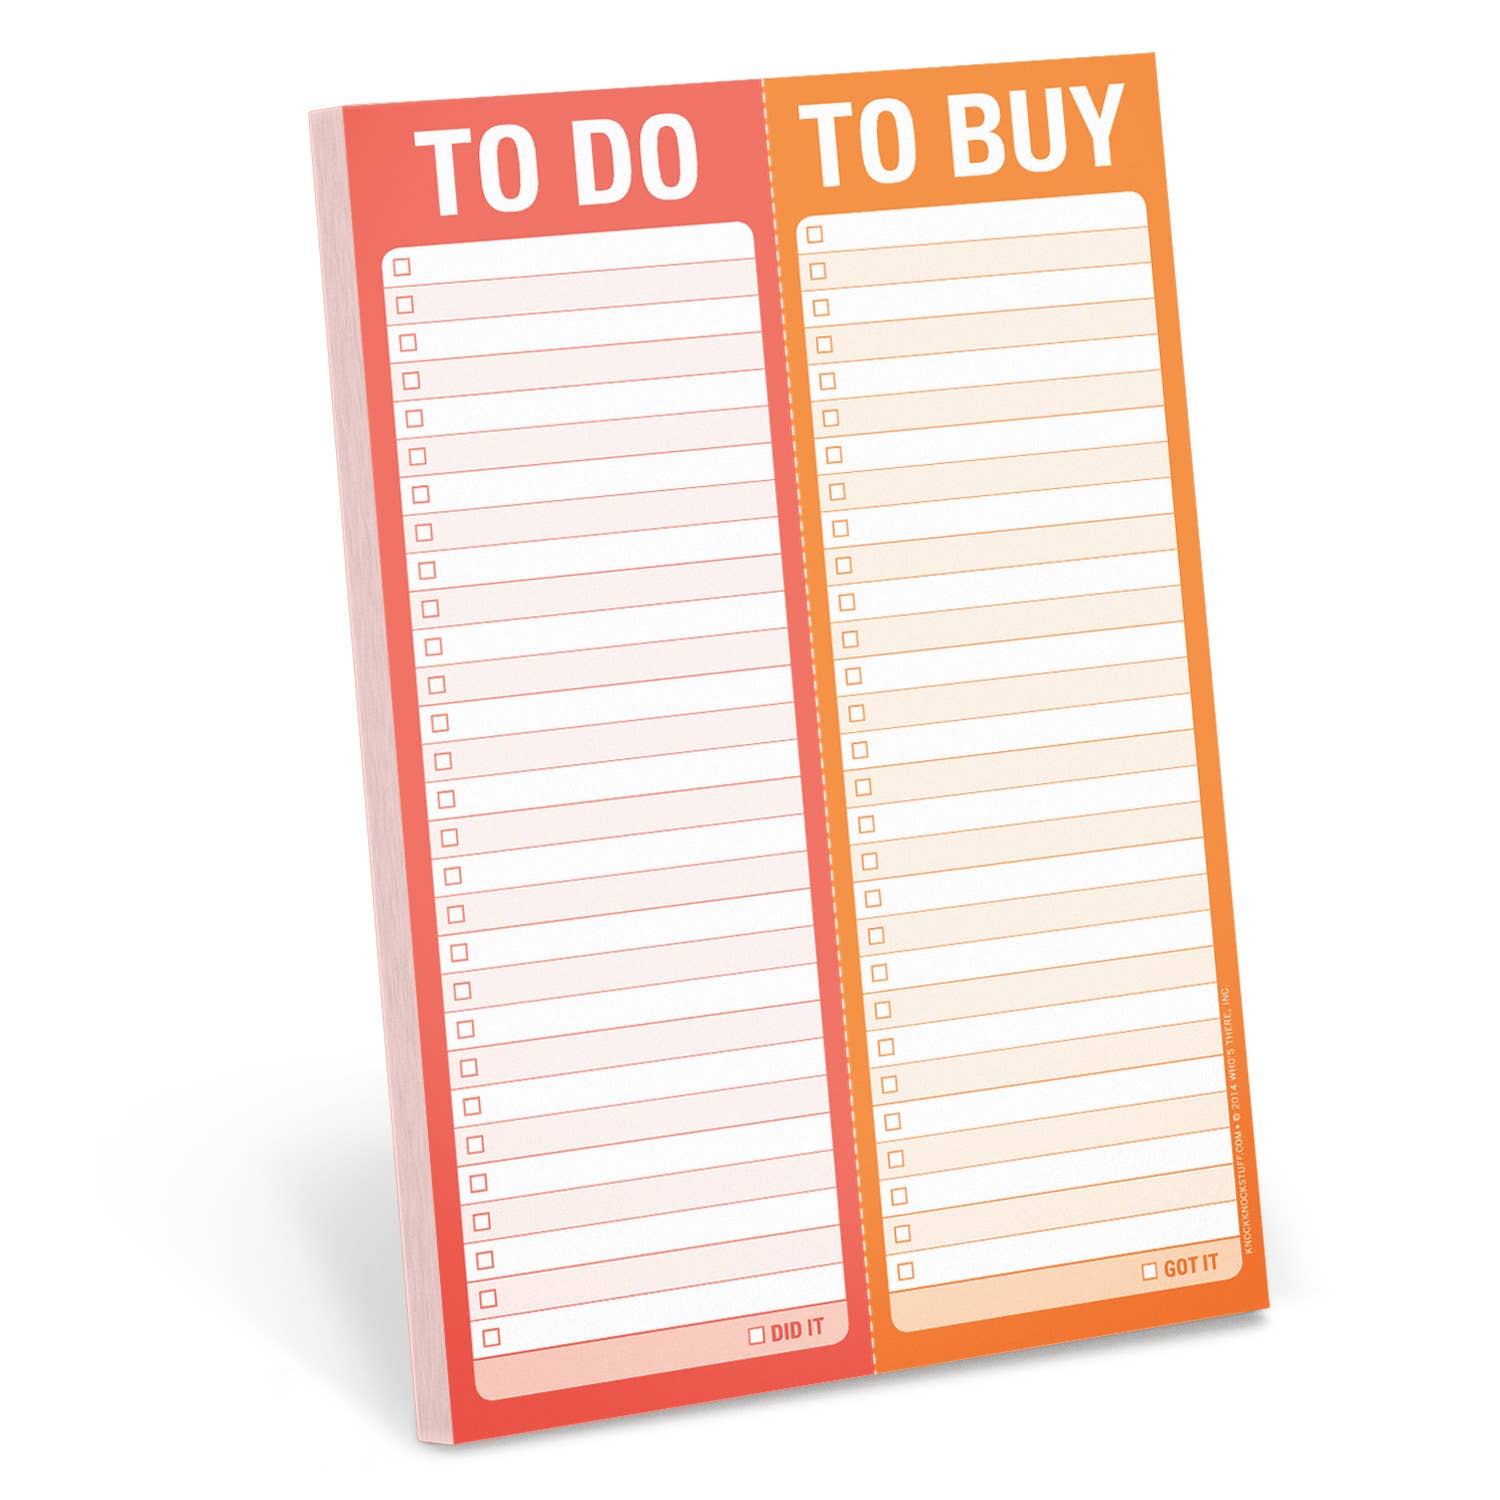 To Do/To Buy Perforated Pad